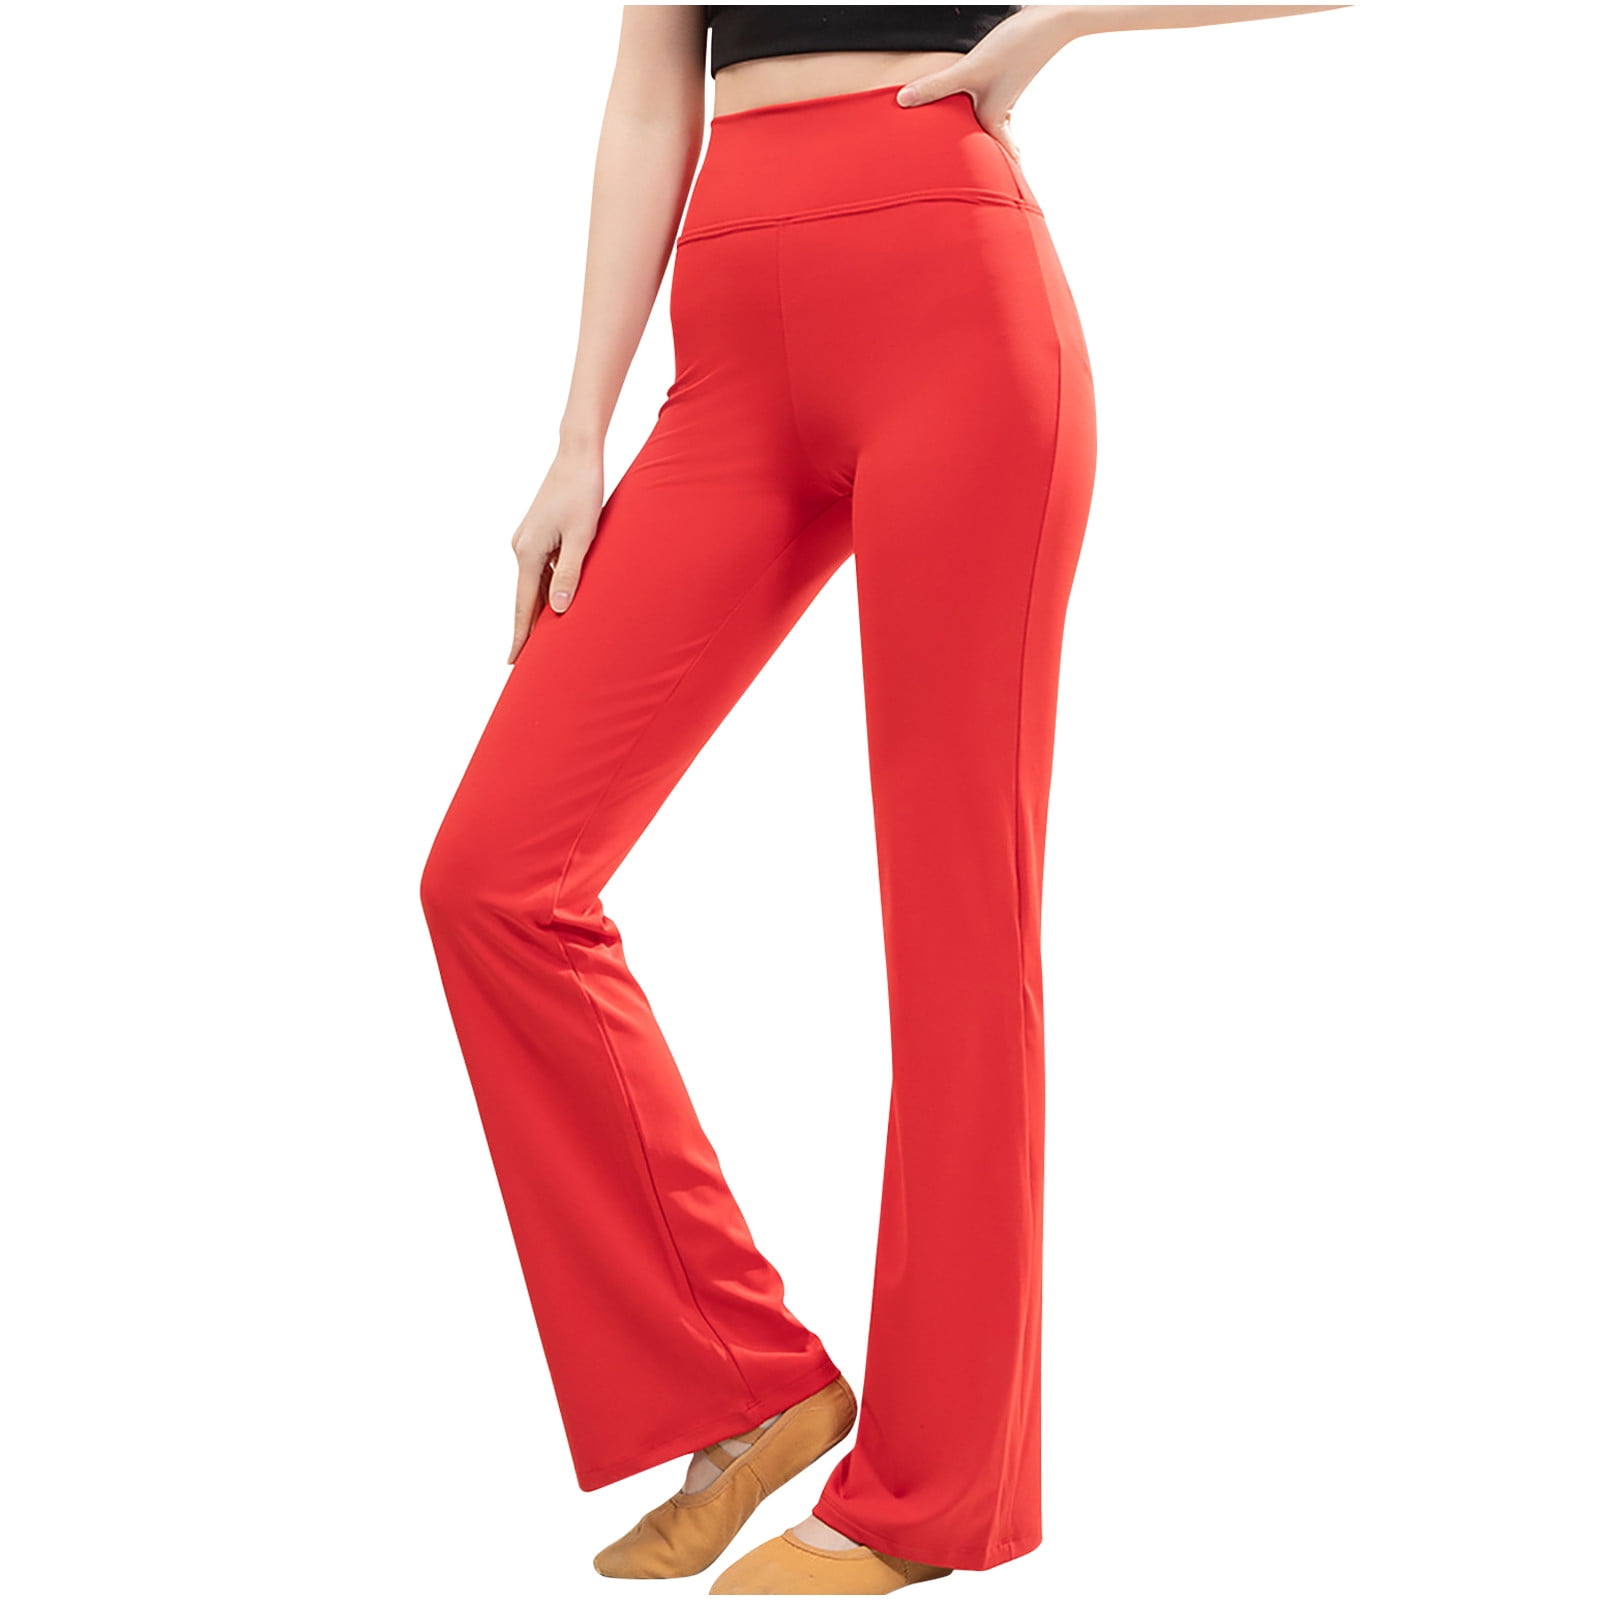 Reduce Price Hfyihgf Bootcut Yoga Pants for Women High Waist Dress Pants  Bootleg Workout Pant Stylish Flared Leggings for Casual Work(Red,XL) 